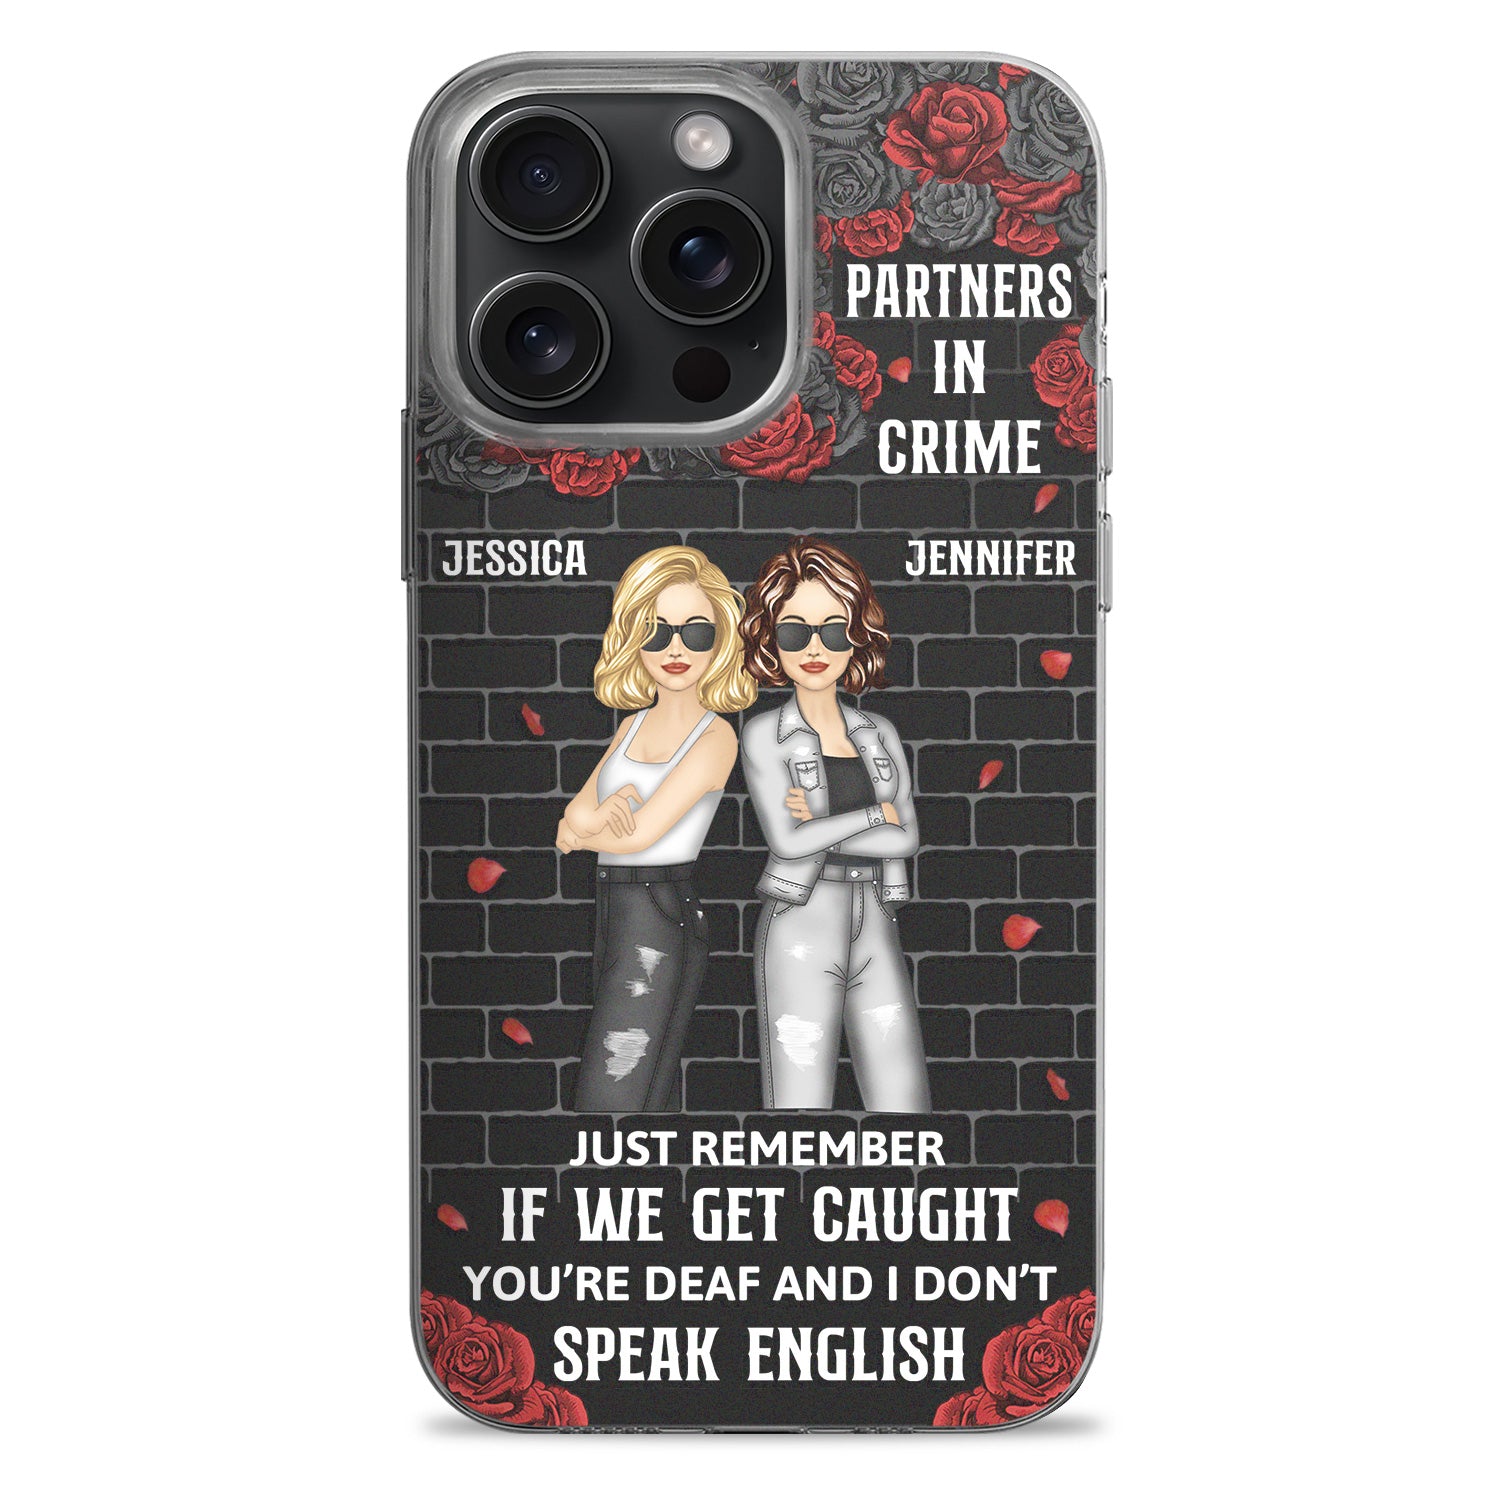 Bestie Partners In Crime If We Get Caught - Birthday, Funny Gift For Friend, Sister - Personalized Clear Phone Case